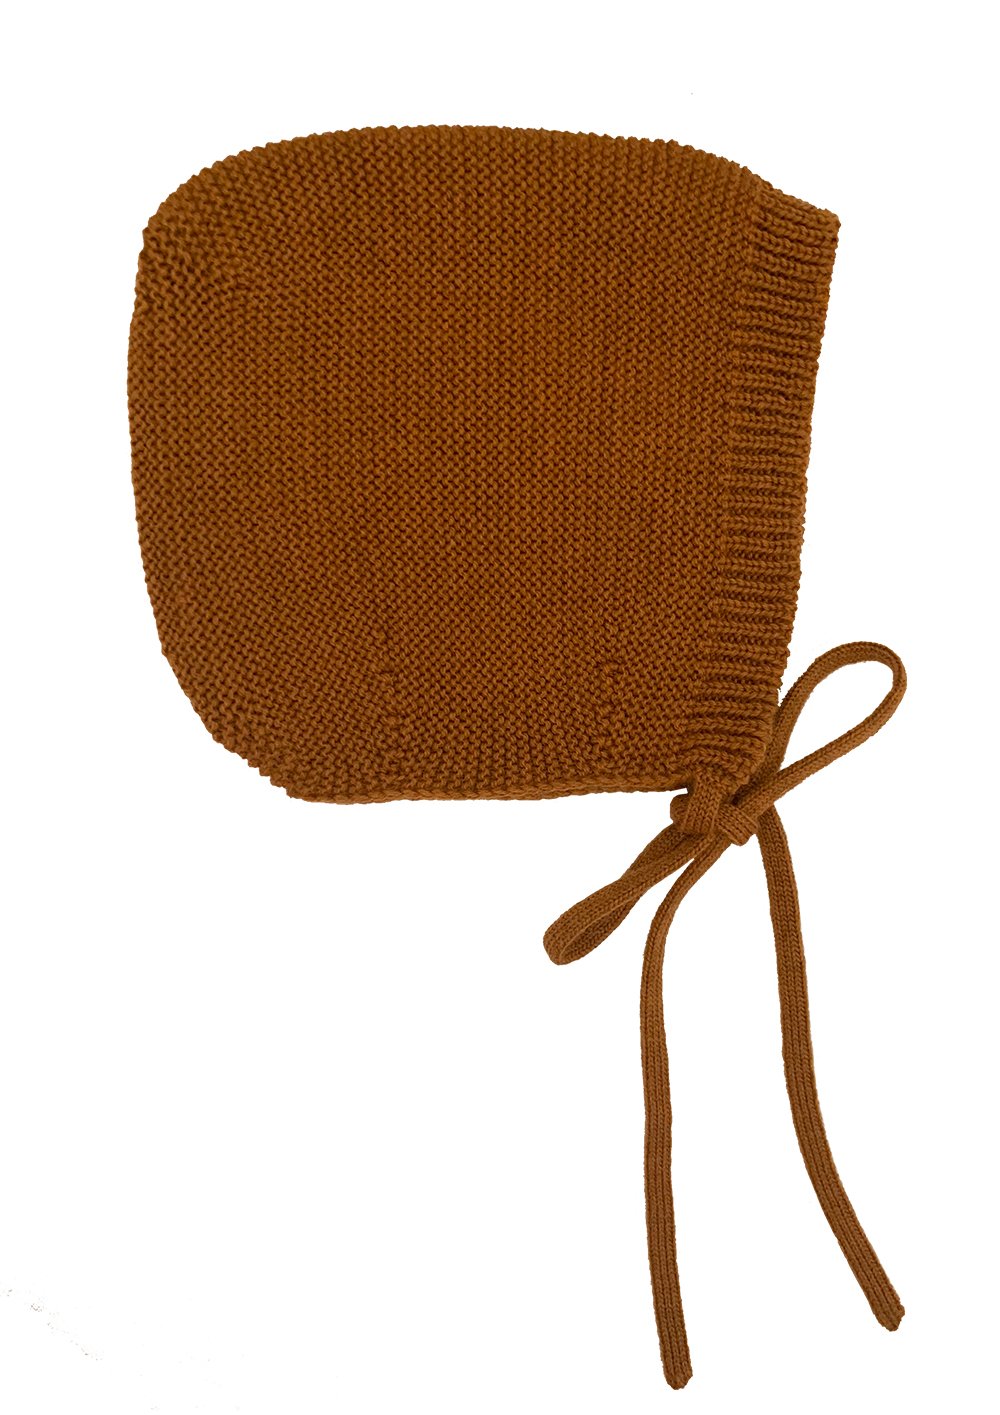 Rust brown knitted baby bonnet with tie